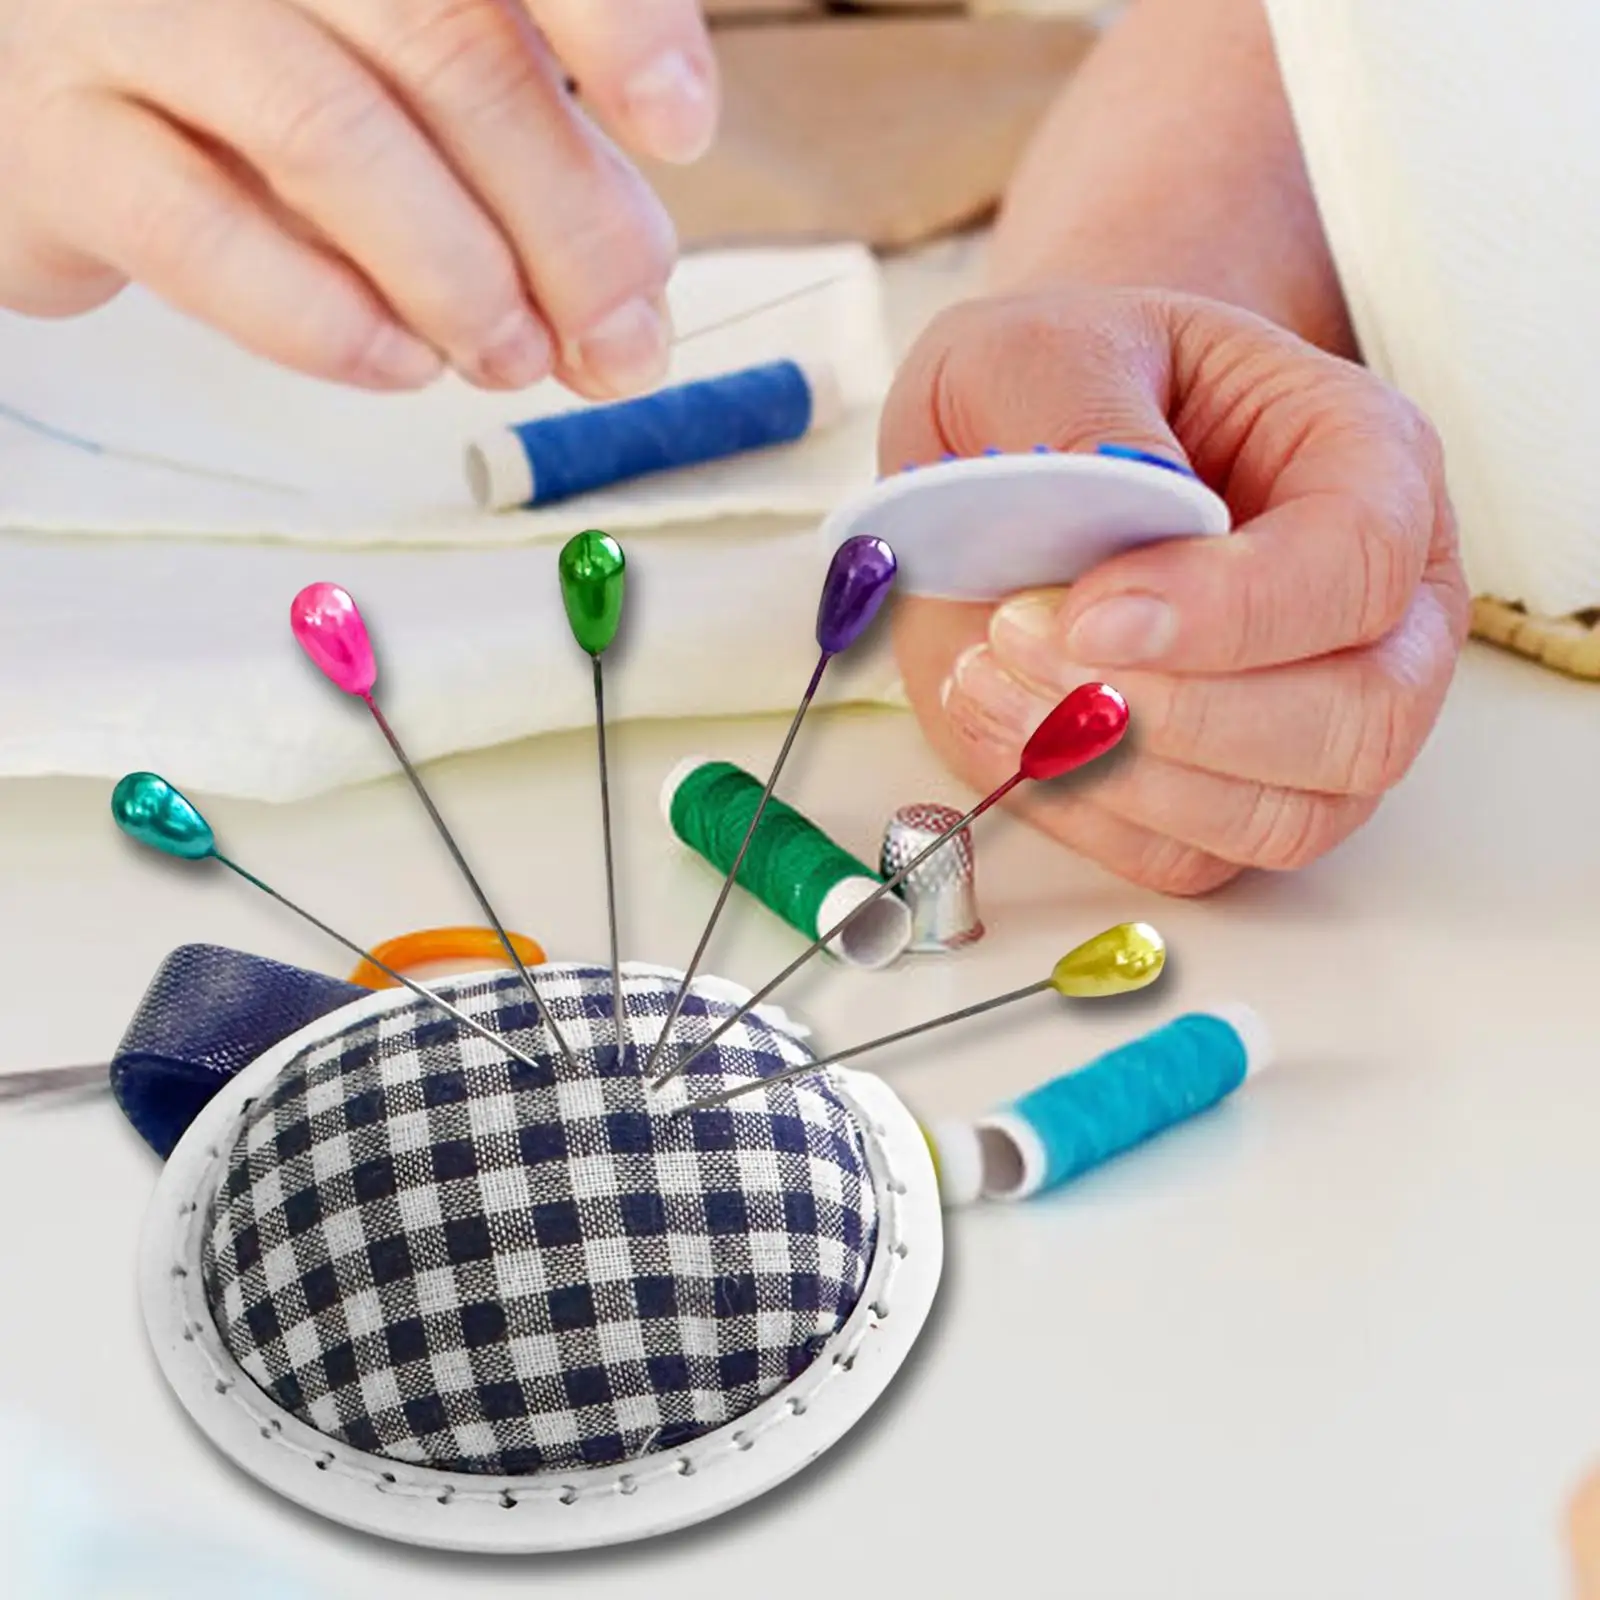 Wrist Pin Cushion DIY Craft Pin Needle Cushion Convenient Portable Home Sewing Wearable Home Use Needlework Sewing Needle Holder